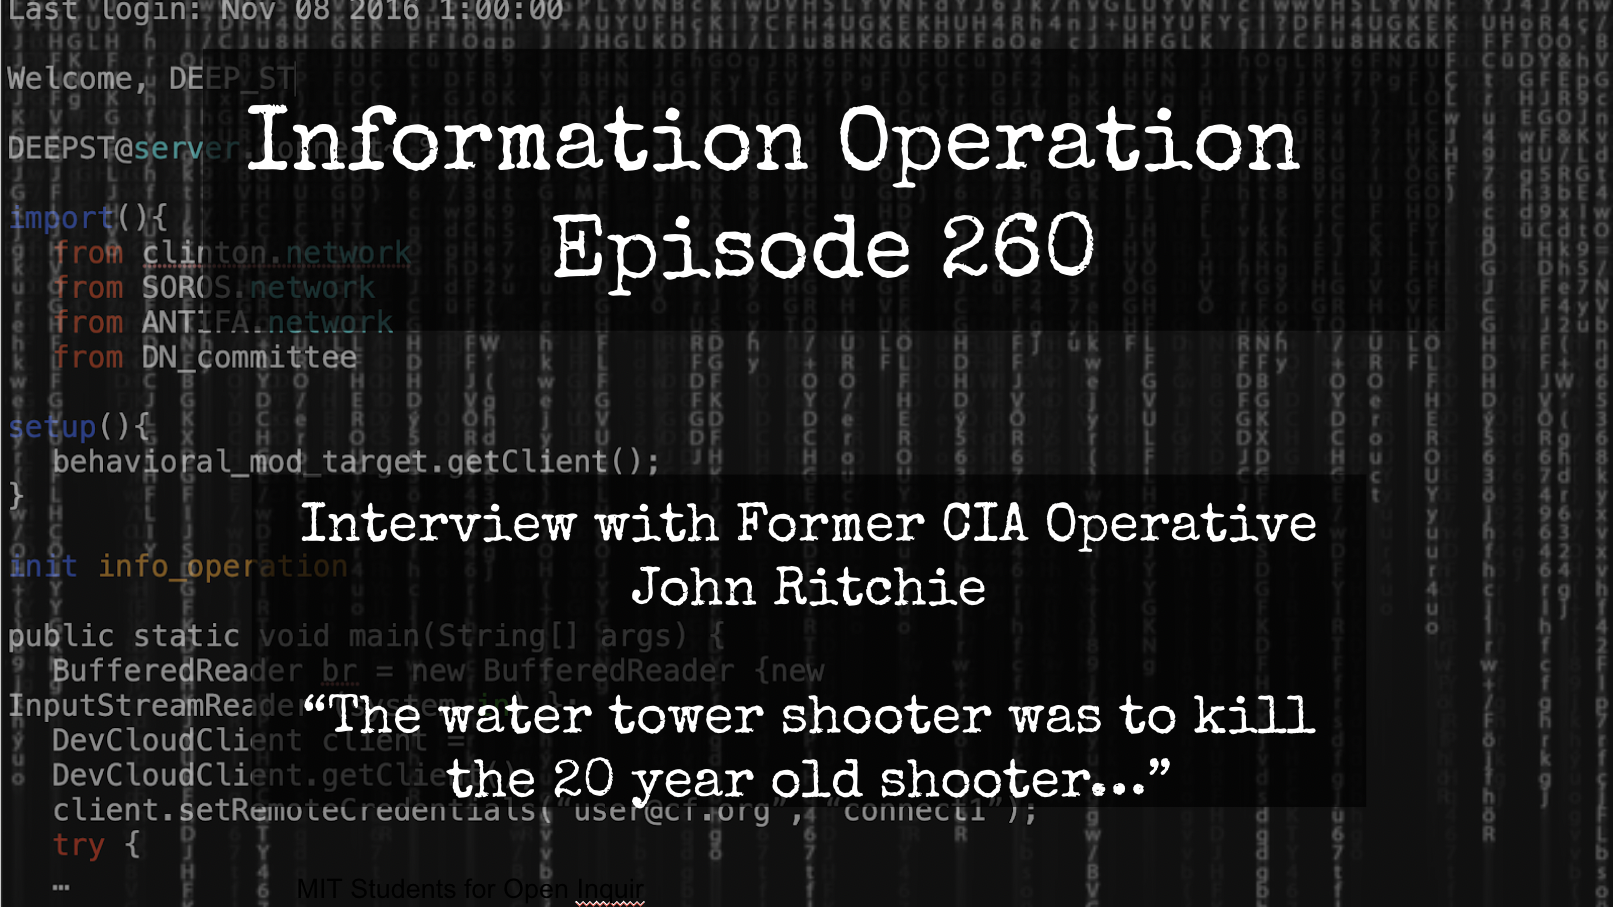 LIVE 7pm EST: IO Episode 260 - Former CIA John Ritchie - Multiple Shooters Confirmed